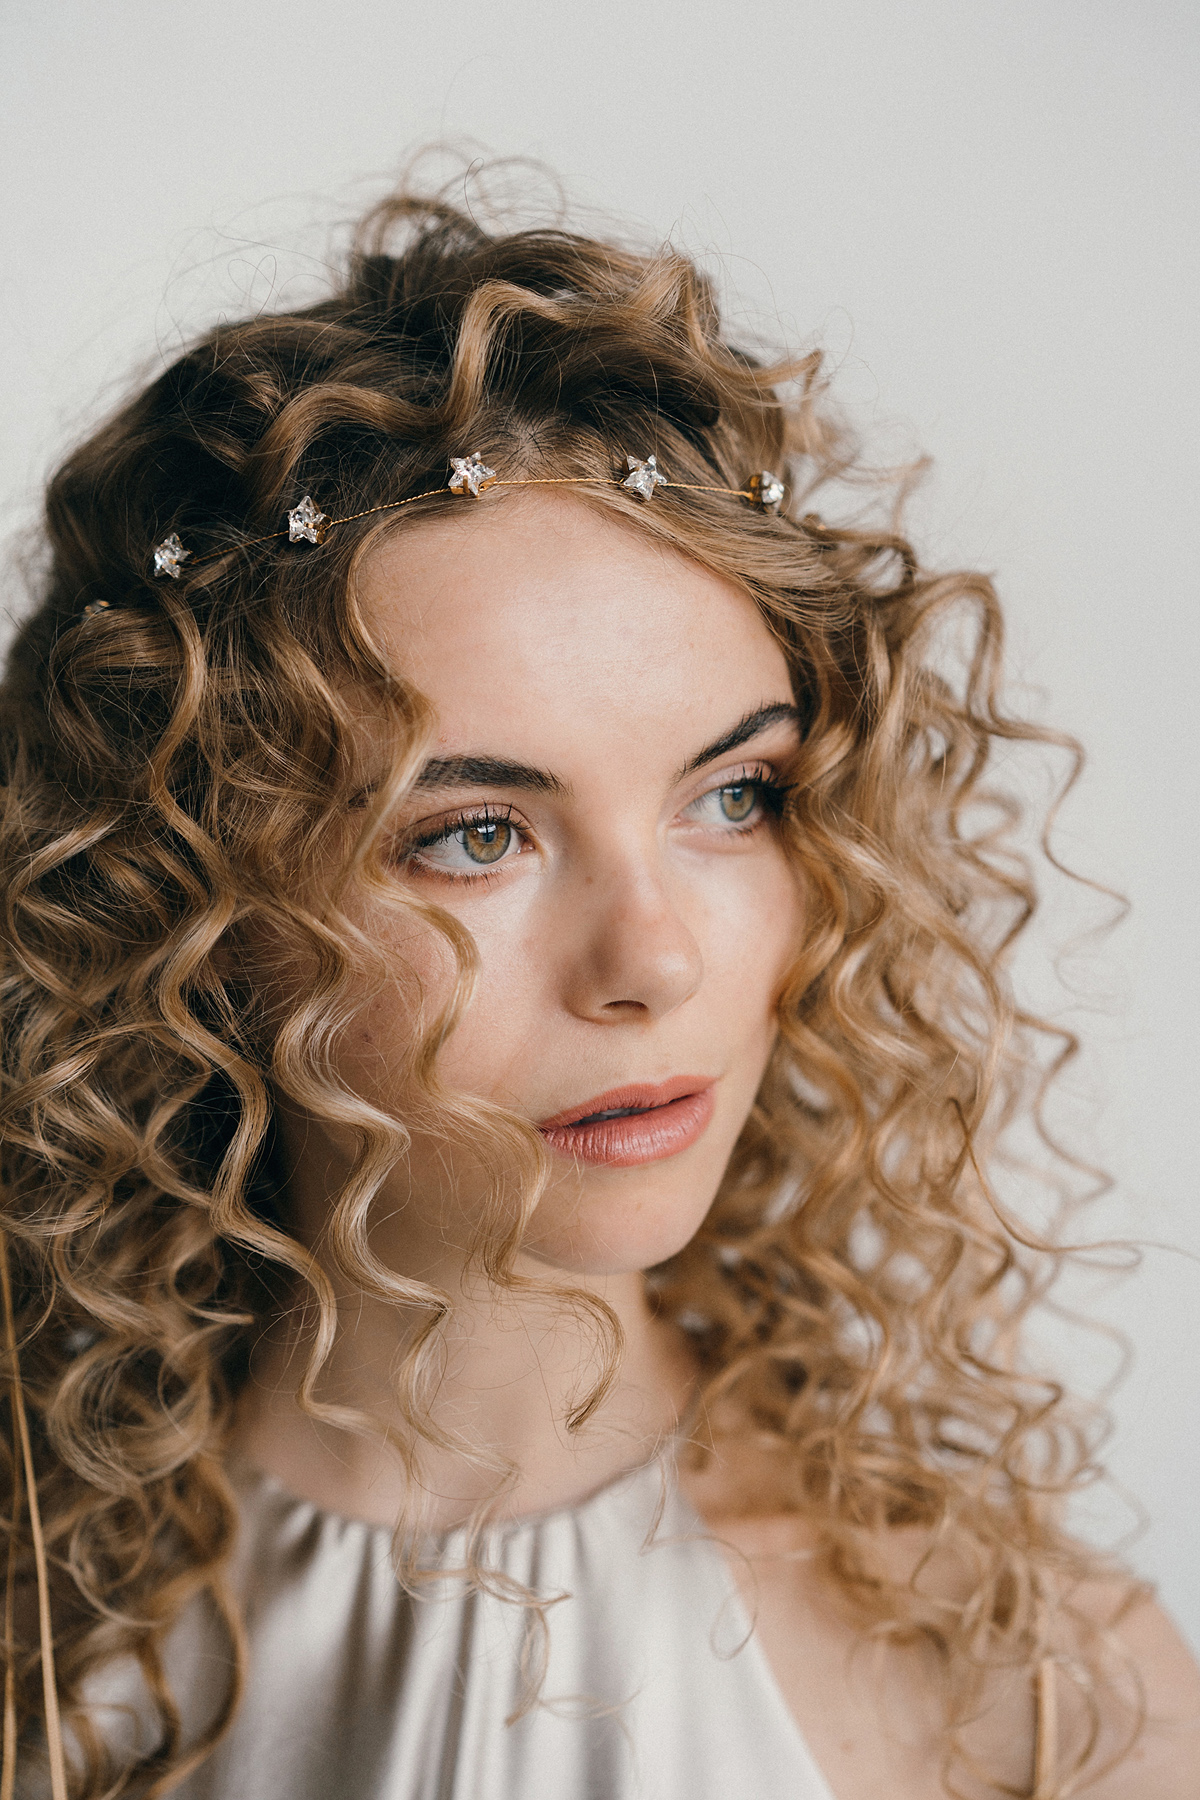 How To Style Wedding Hair Accessories Curly Hair, Debbie Carlisle + Top Hair Care Tips for Curly Haired Brides | Love My Dress® UK Wedding Blog + Wedding Directory